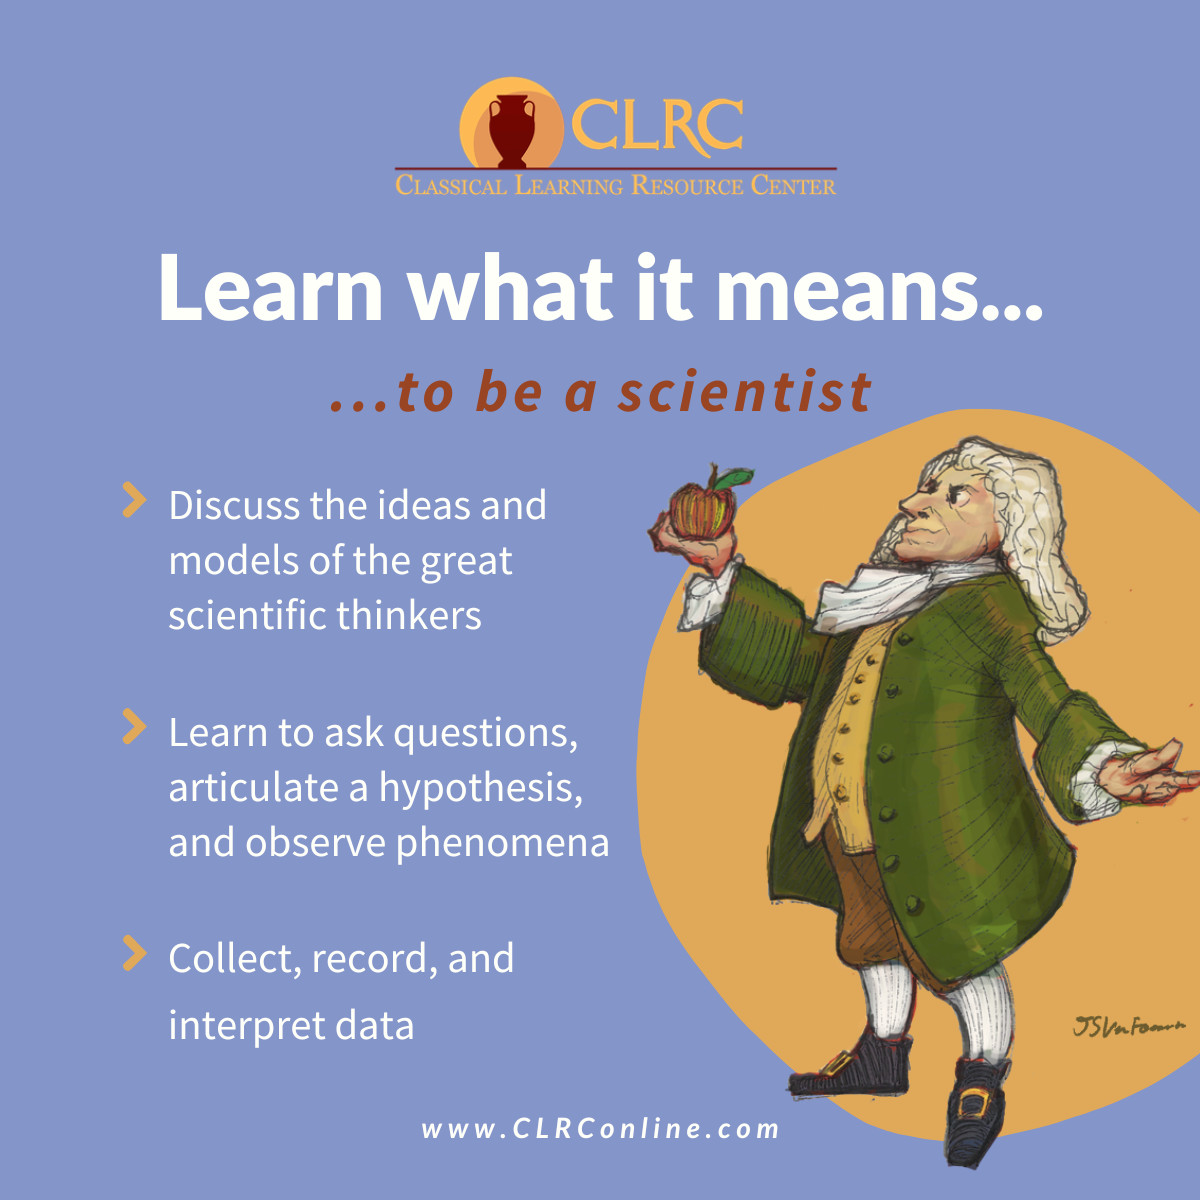 In CLRC #sciencecourses, students are introduced to ideas & models of great scientific thinkers. Inspired by these scientists & guided by teachers, students develop their ability to ask questions, articulate a hypothesis, observe phenomena, & collect, record, & interpret data.